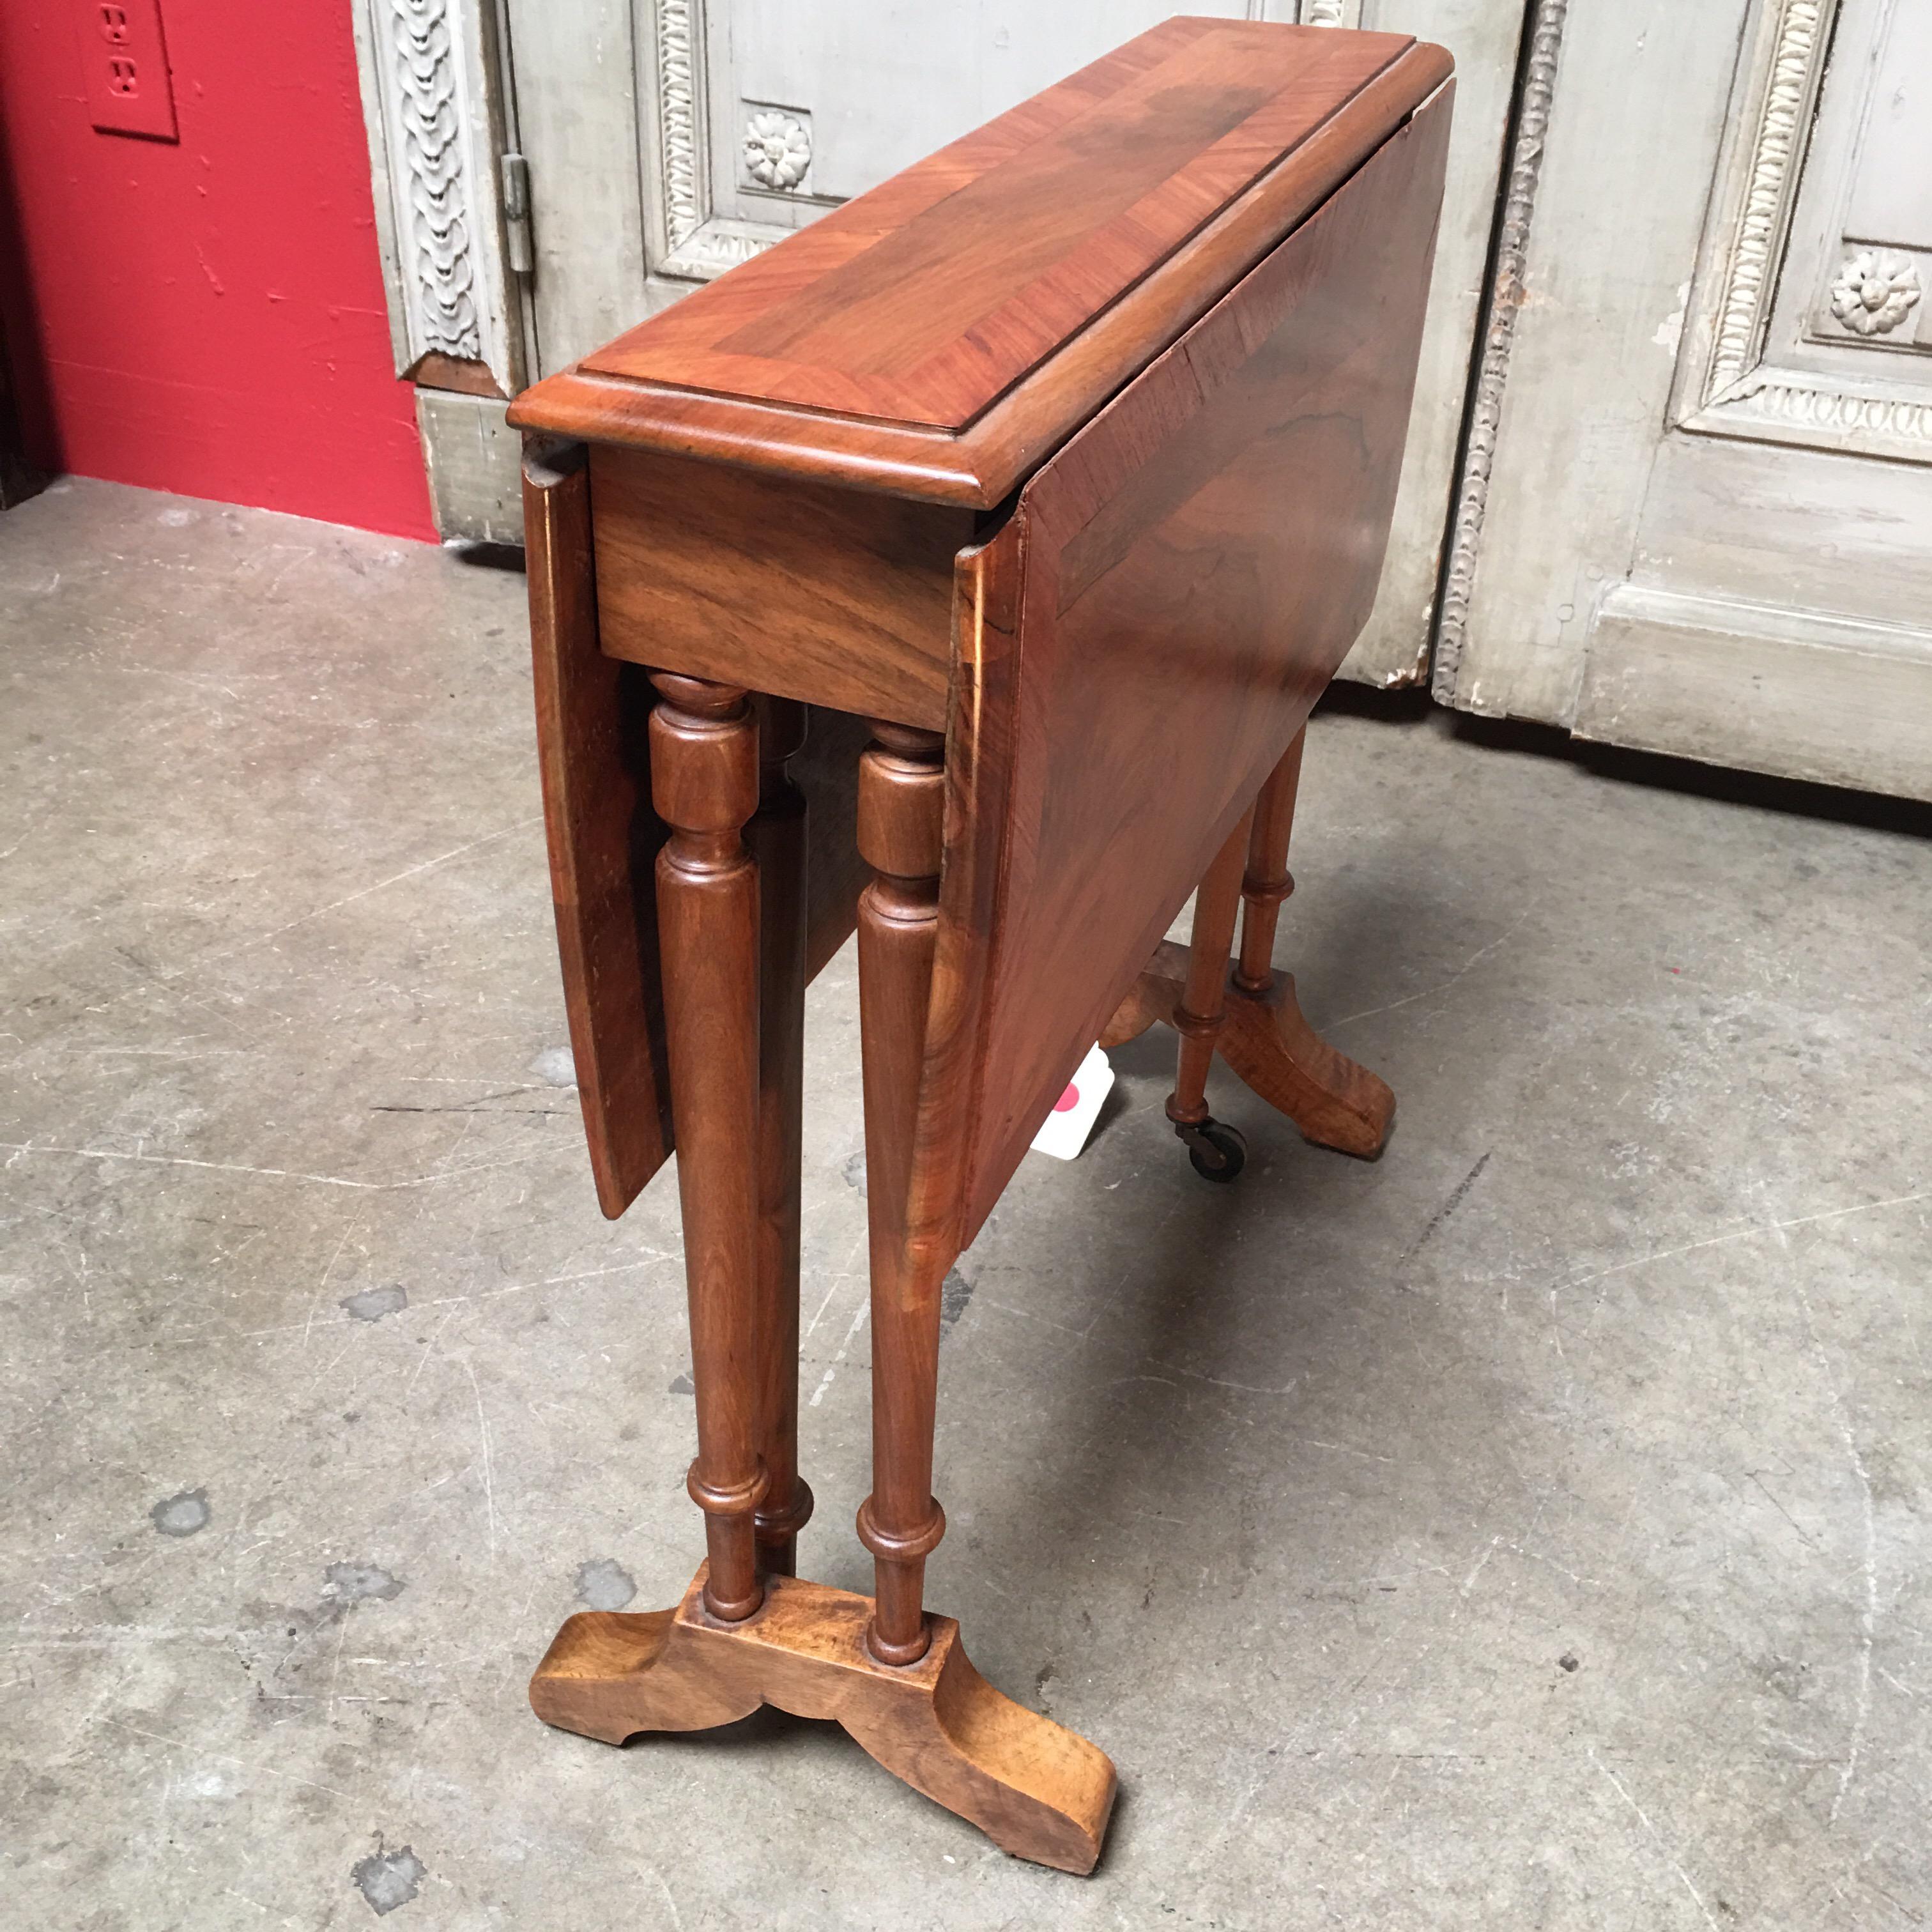 19th Century English Sutherland Drop-Leaf Table in Walnut and Kingwood Veneer For Sale 4